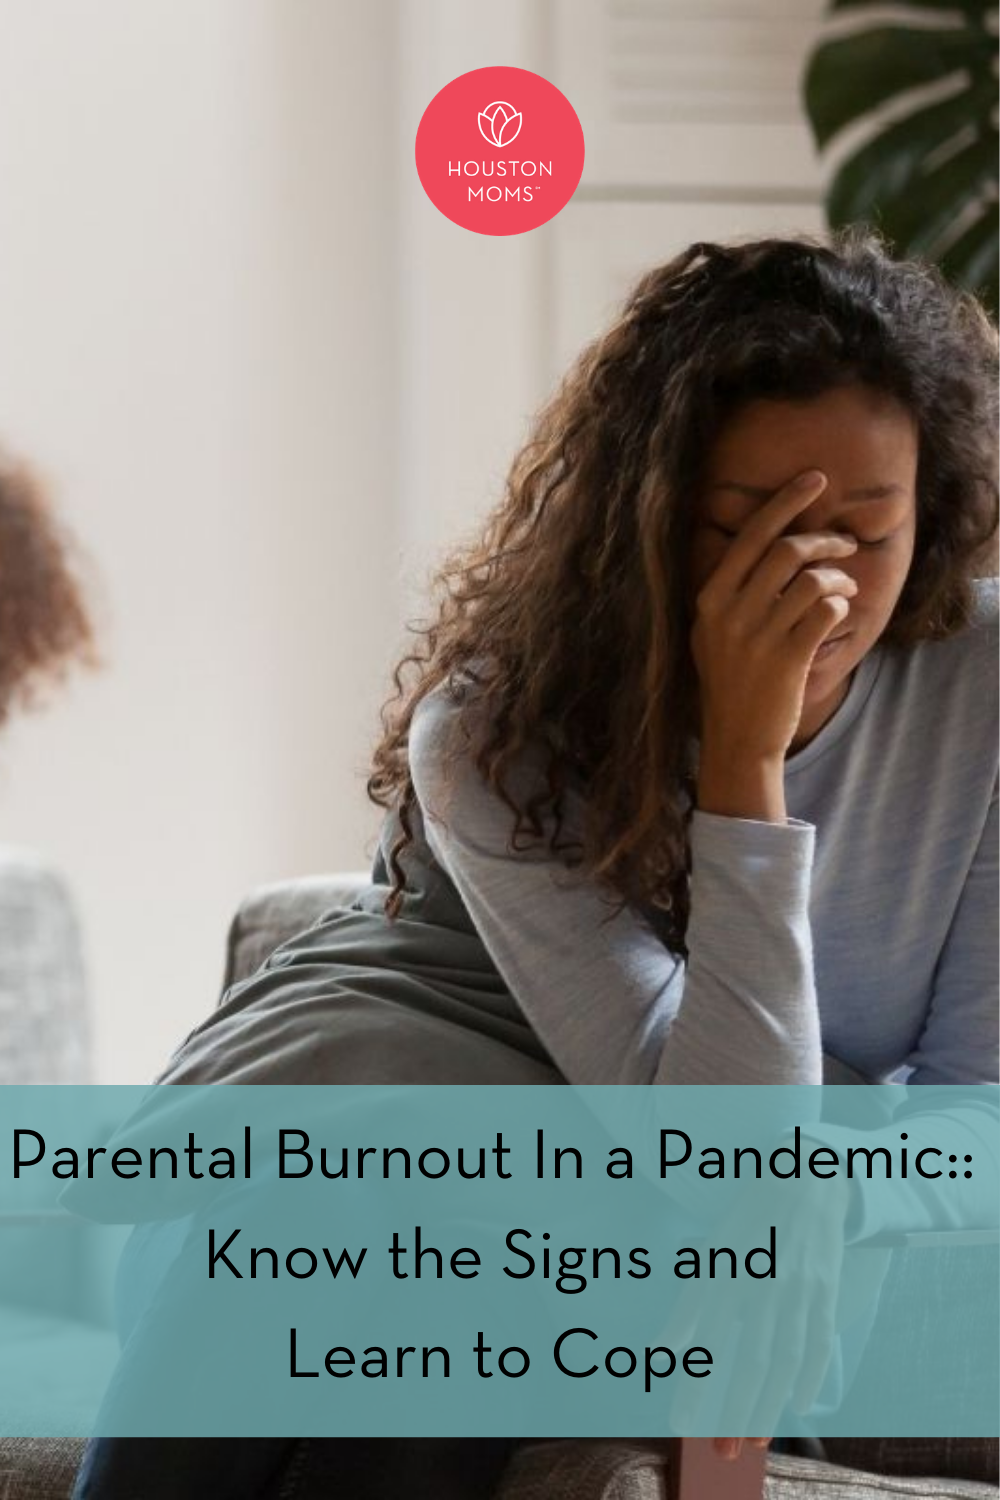 Houston Moms "Parental Burnout in a Pandemic:: Know the Signs and Learn to Cope" #houstonmoms #houstonmomsblog #momsaroundhouston